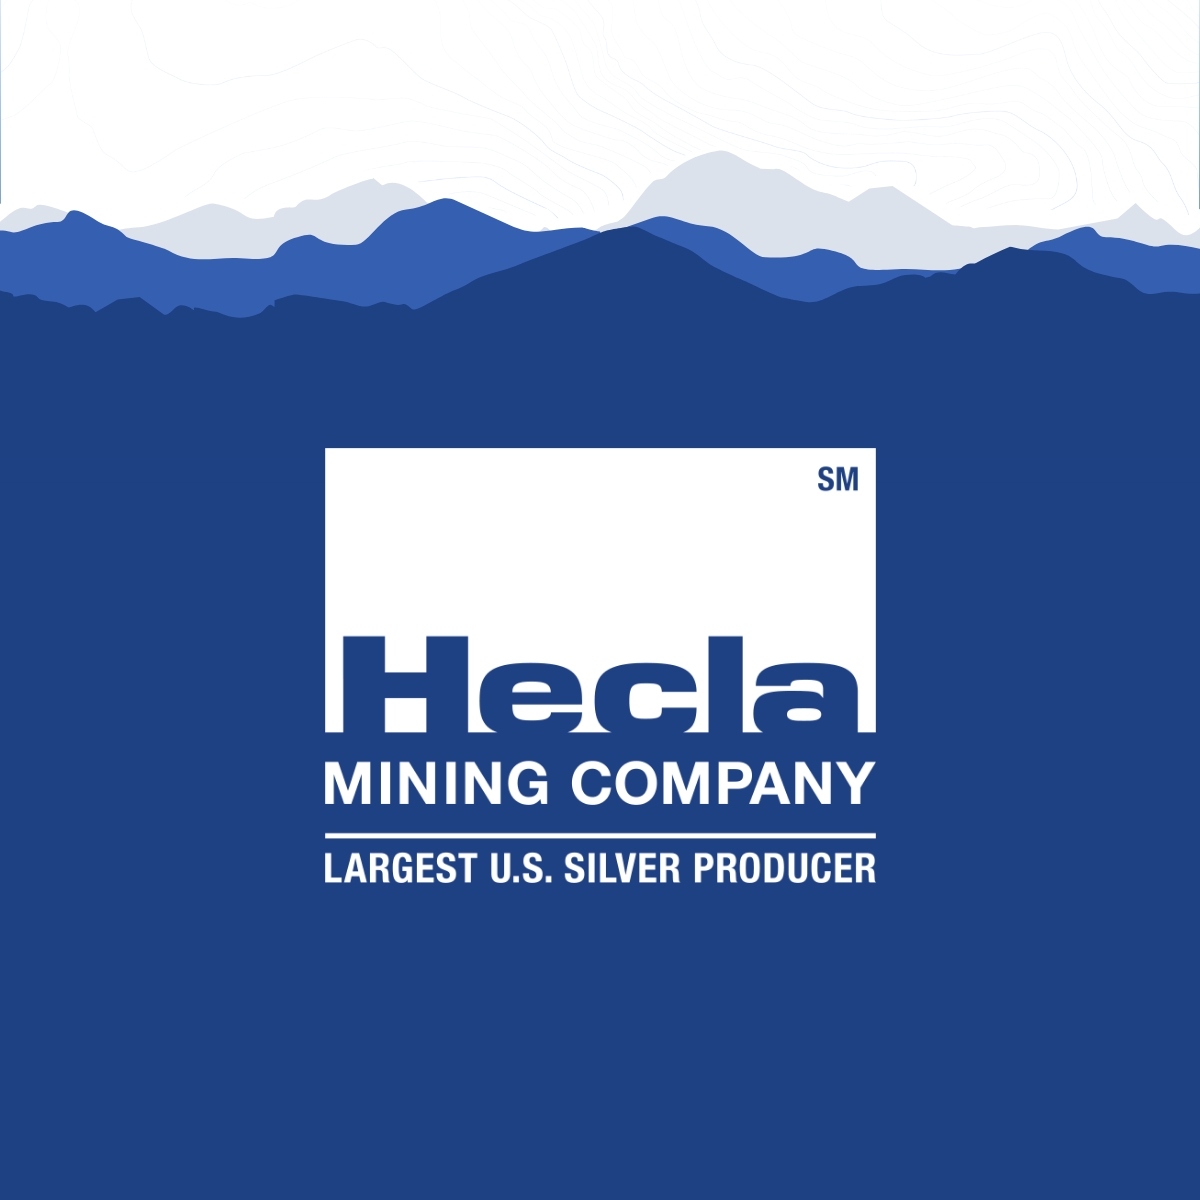 The Hecla Mining Company Featured image logo